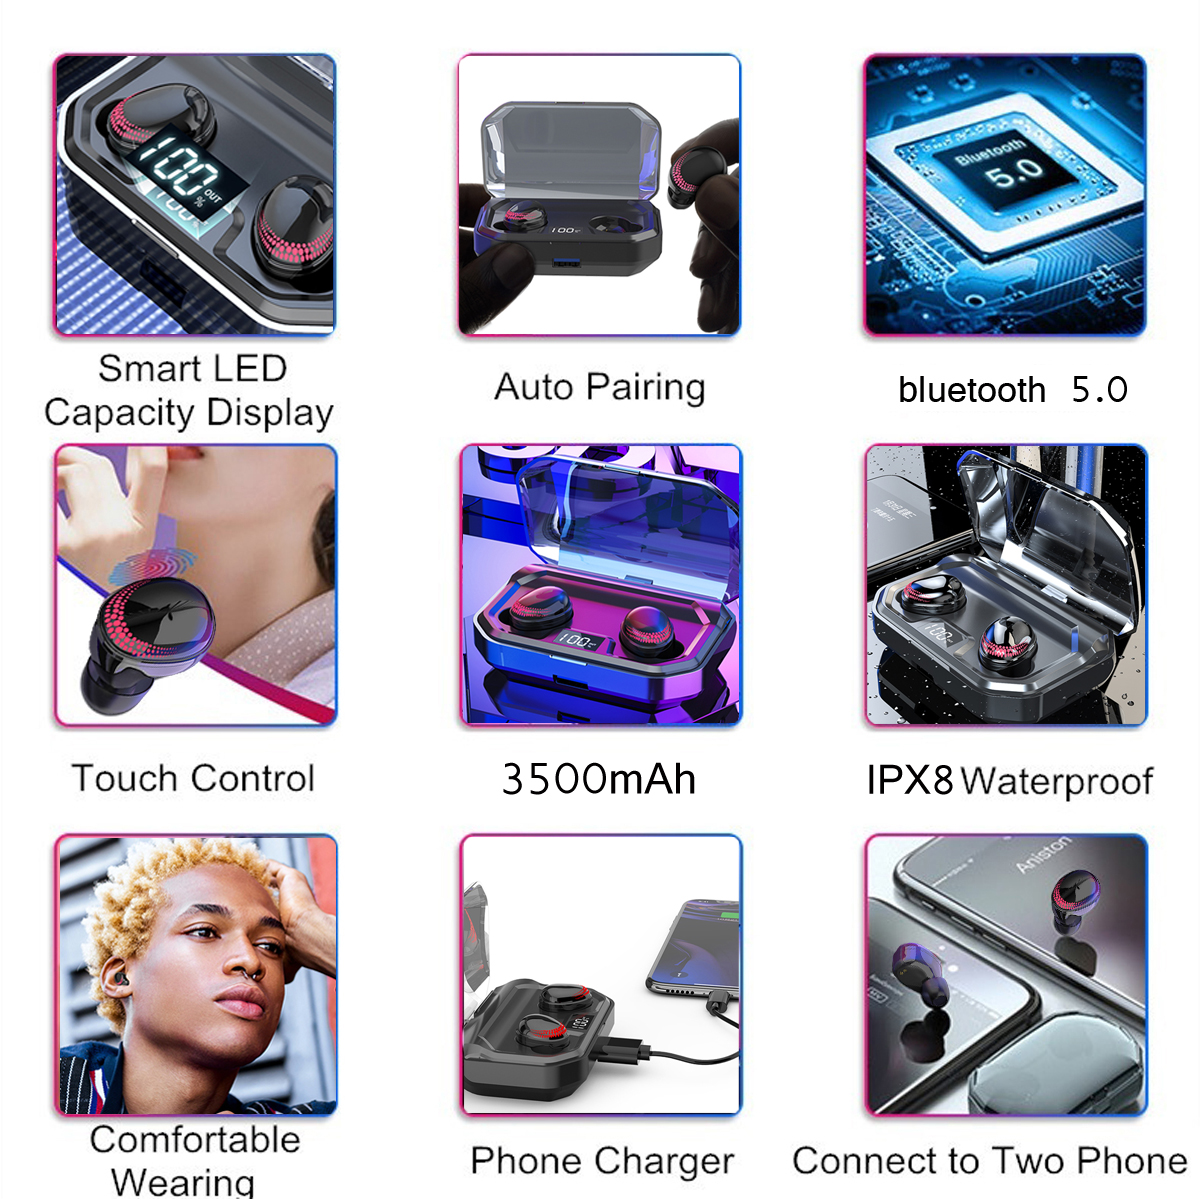 X10-TWS-Wireless-bluetooth-50-Earphone-LED-Power-Display-HiFi-Stereo-CNC-Noise-Cancelling-Earbuds-Sm-1657466-2